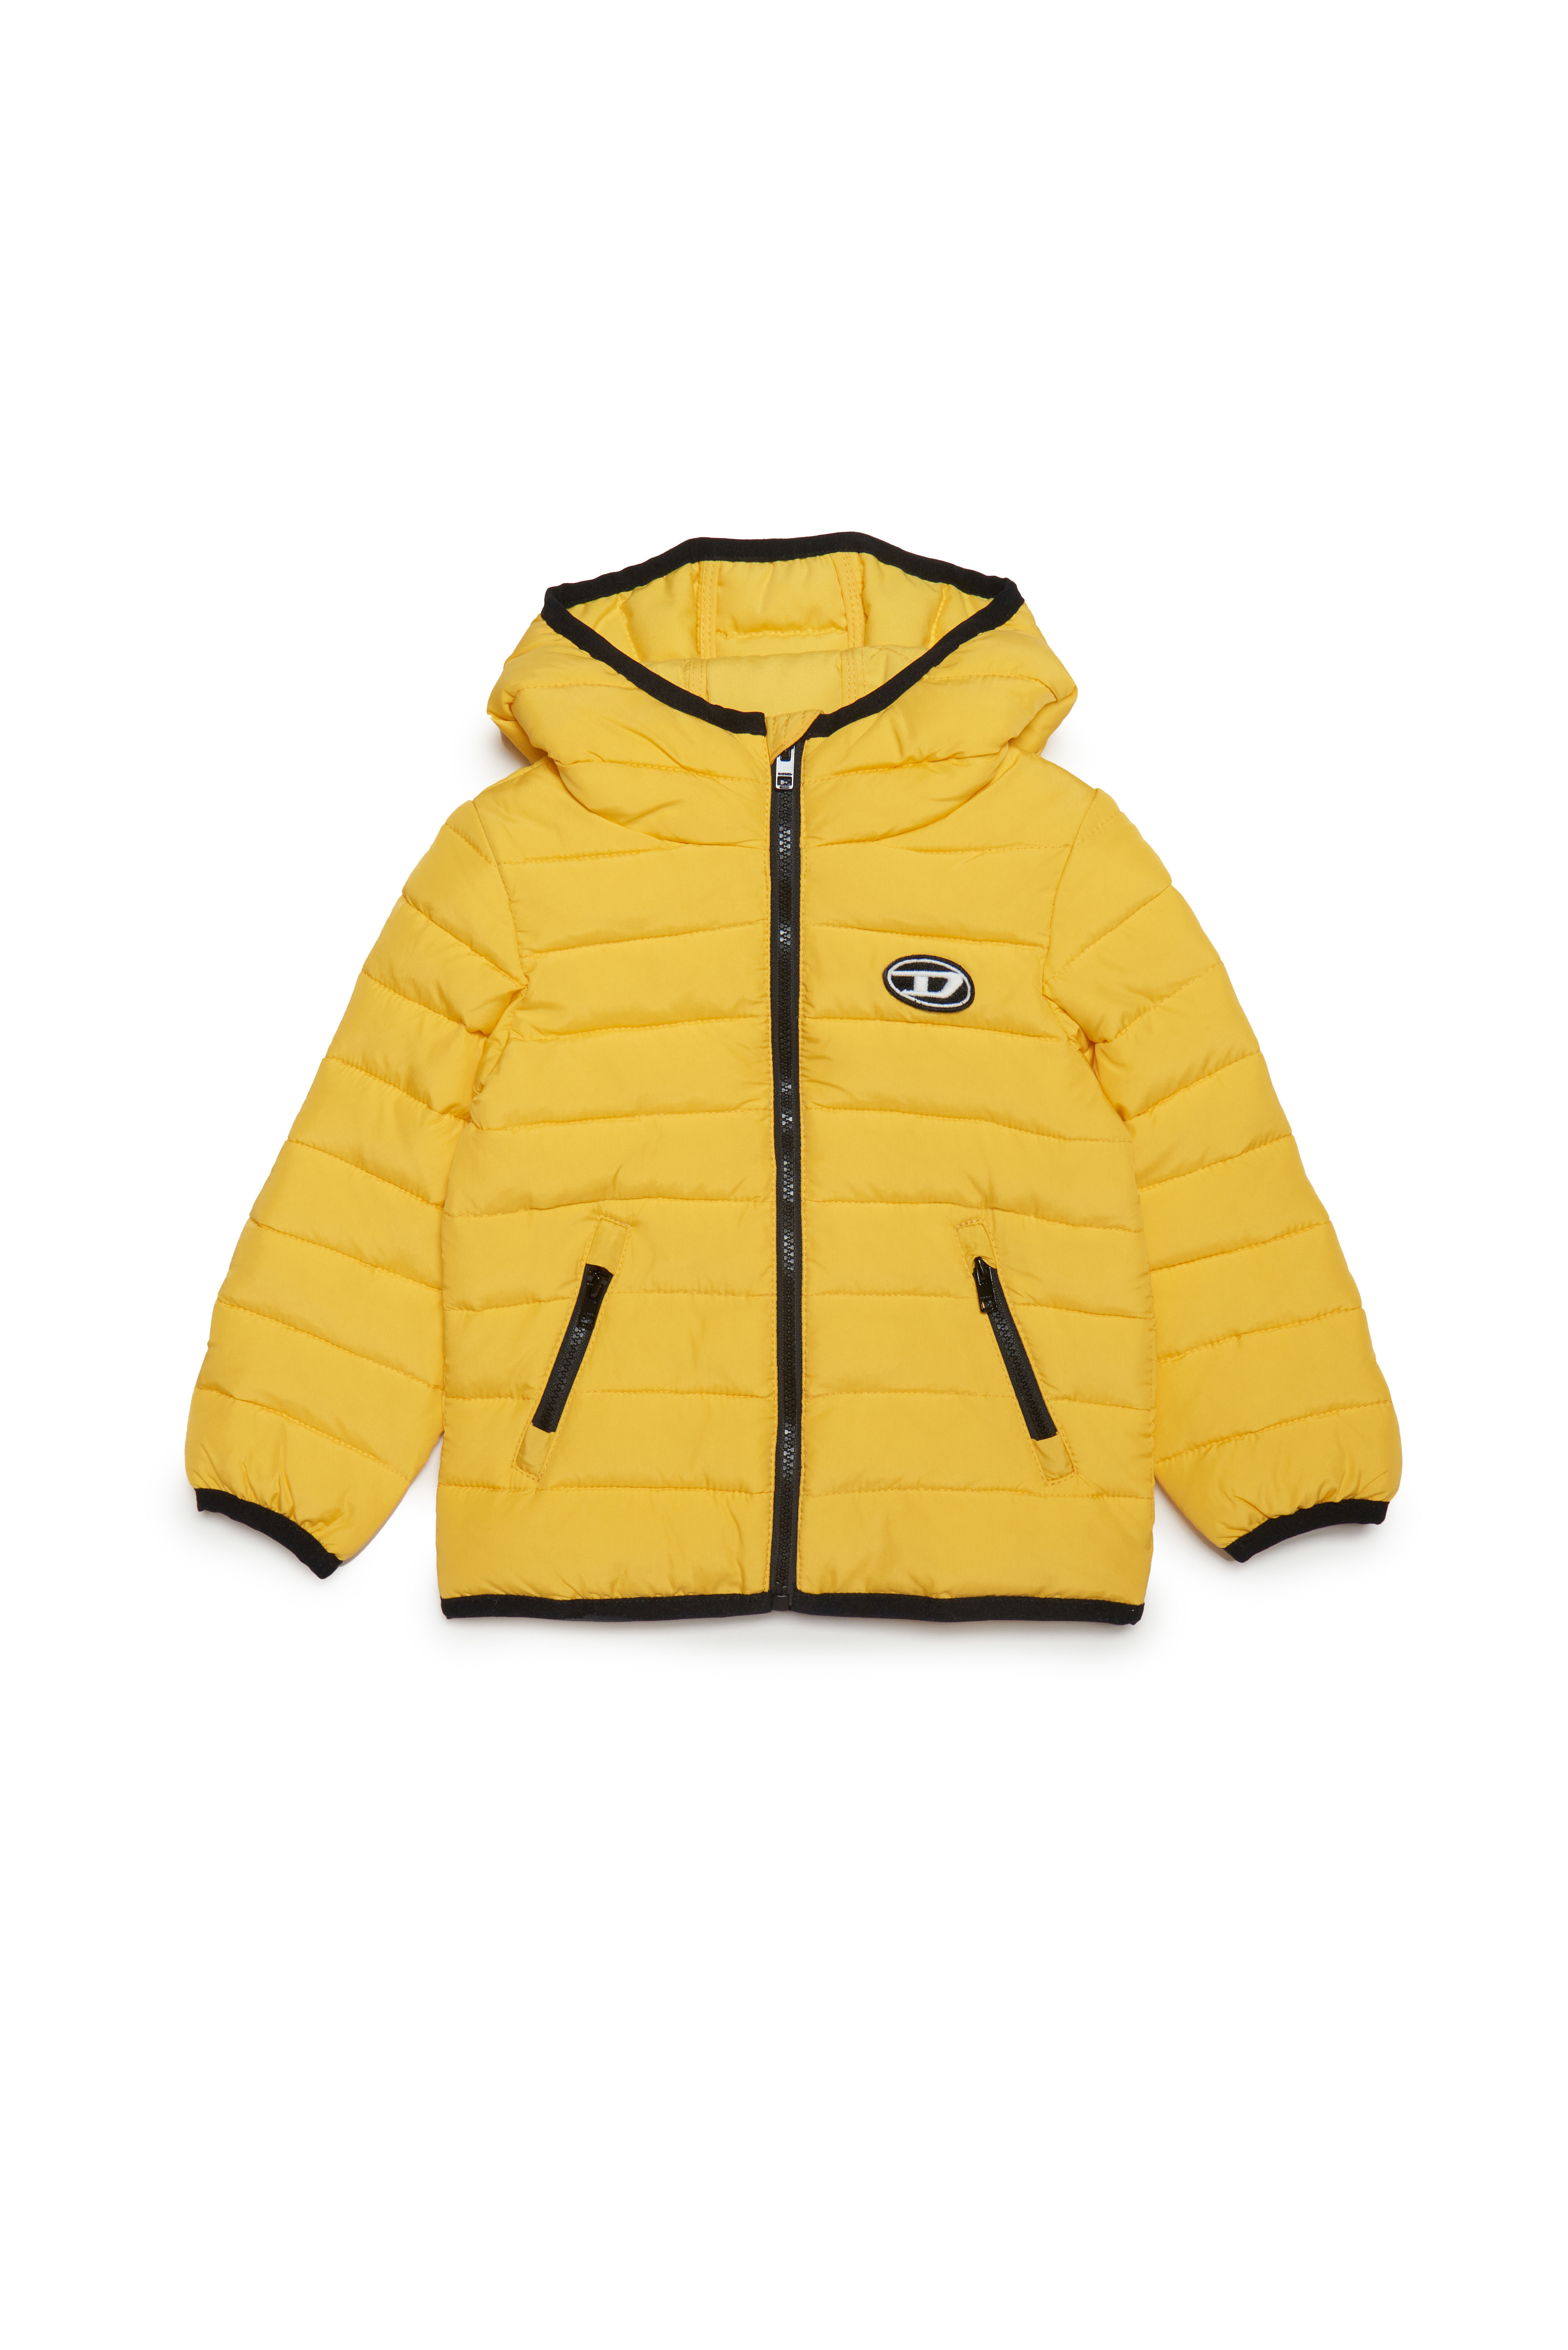 Diesel - Giacca puffer con patch ricamata - Giacche - Unisex - Giallo